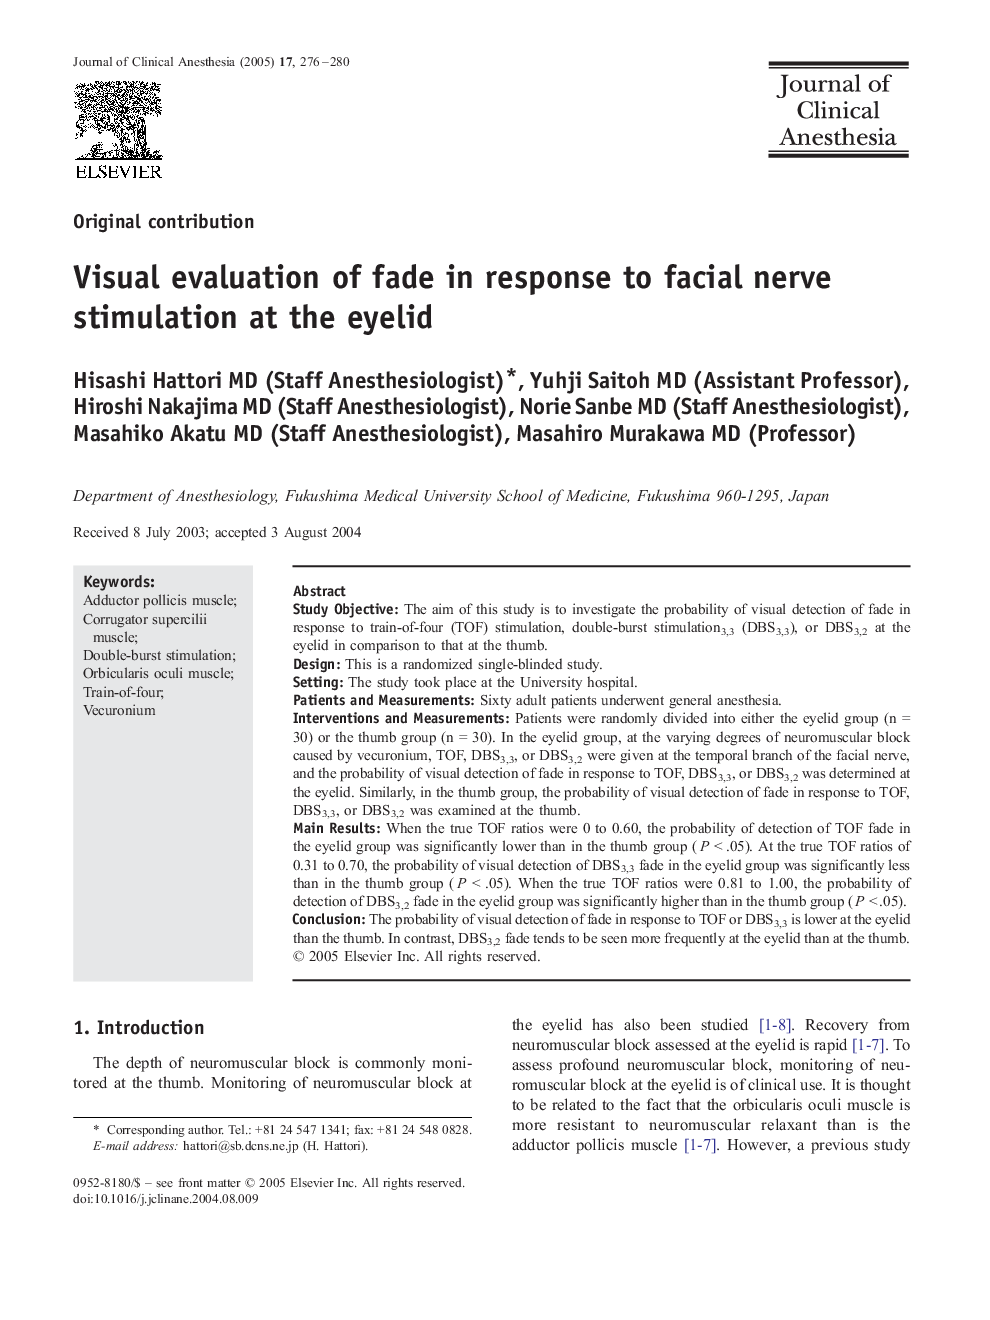 Visual evaluation of fade in response to facial nerve stimulation at the eyelid